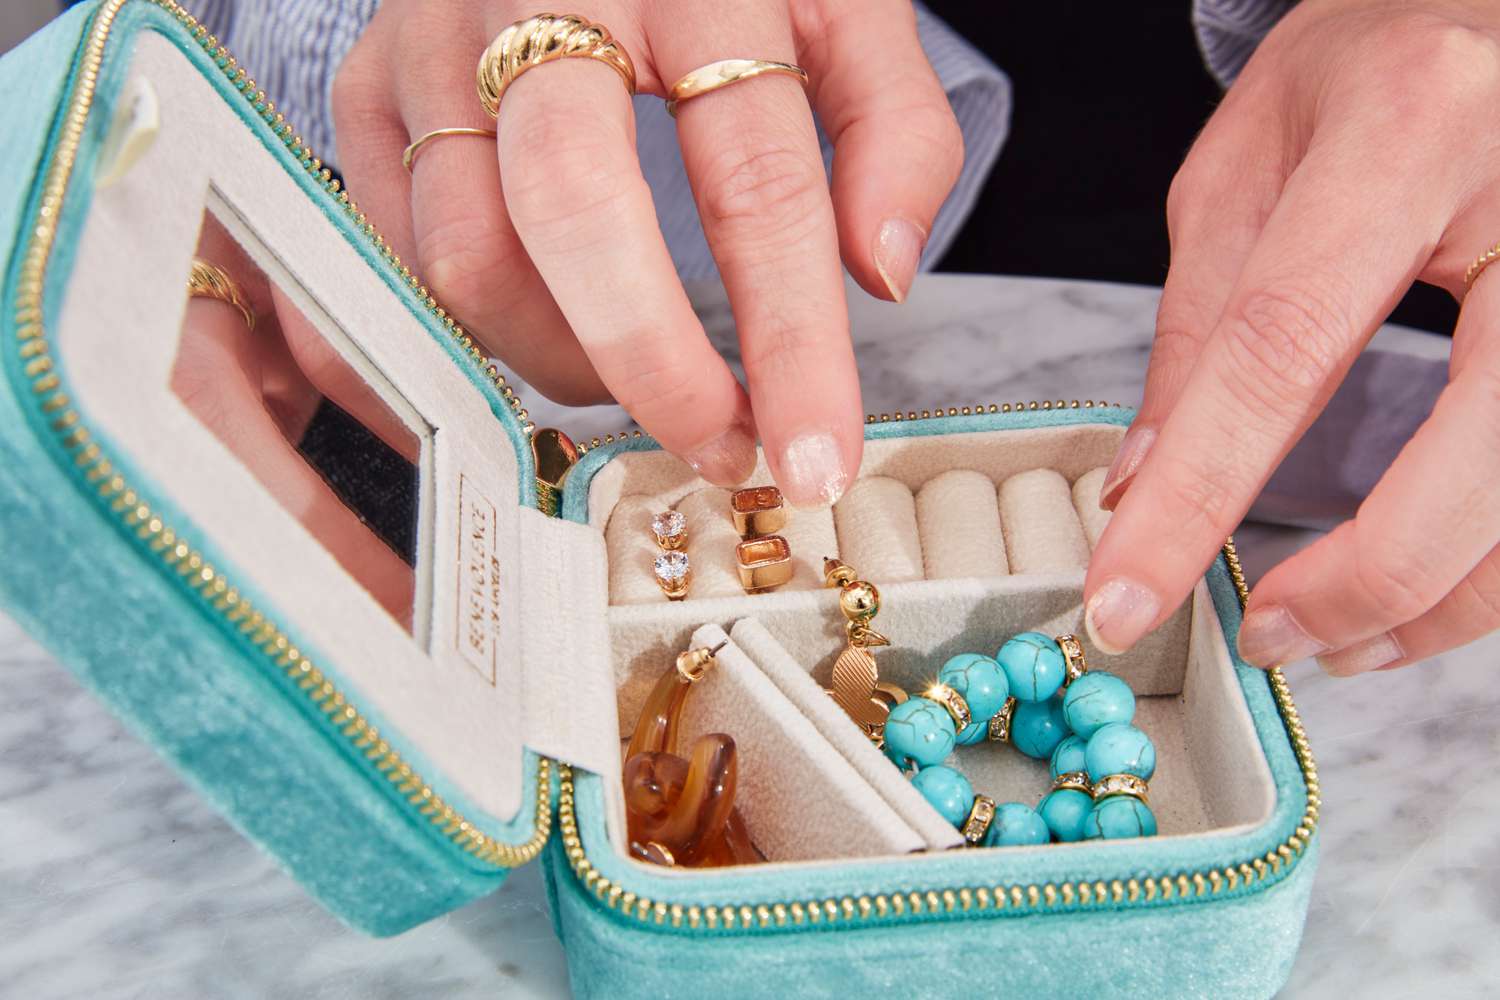 A person places jewelry inside the Benevolence Plush Velvet Travel Jewelry Box Organizer